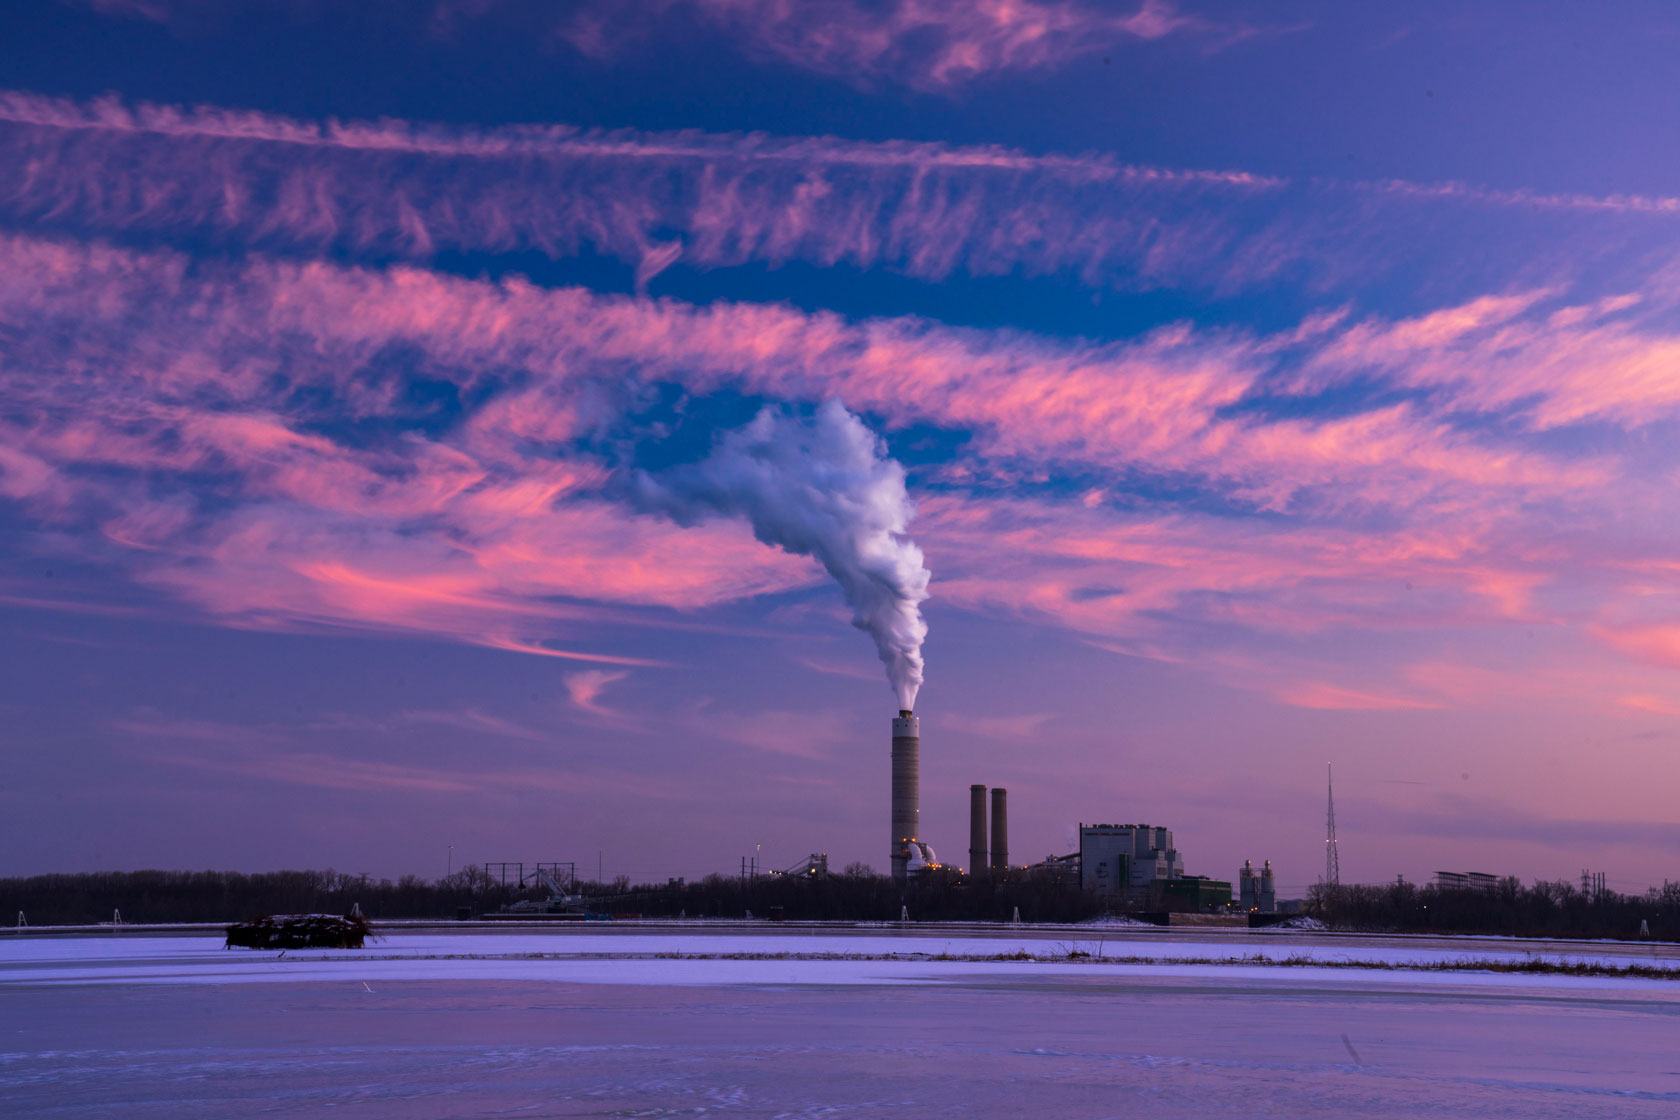 Smoke billows from a power plant across the Mississippi River.